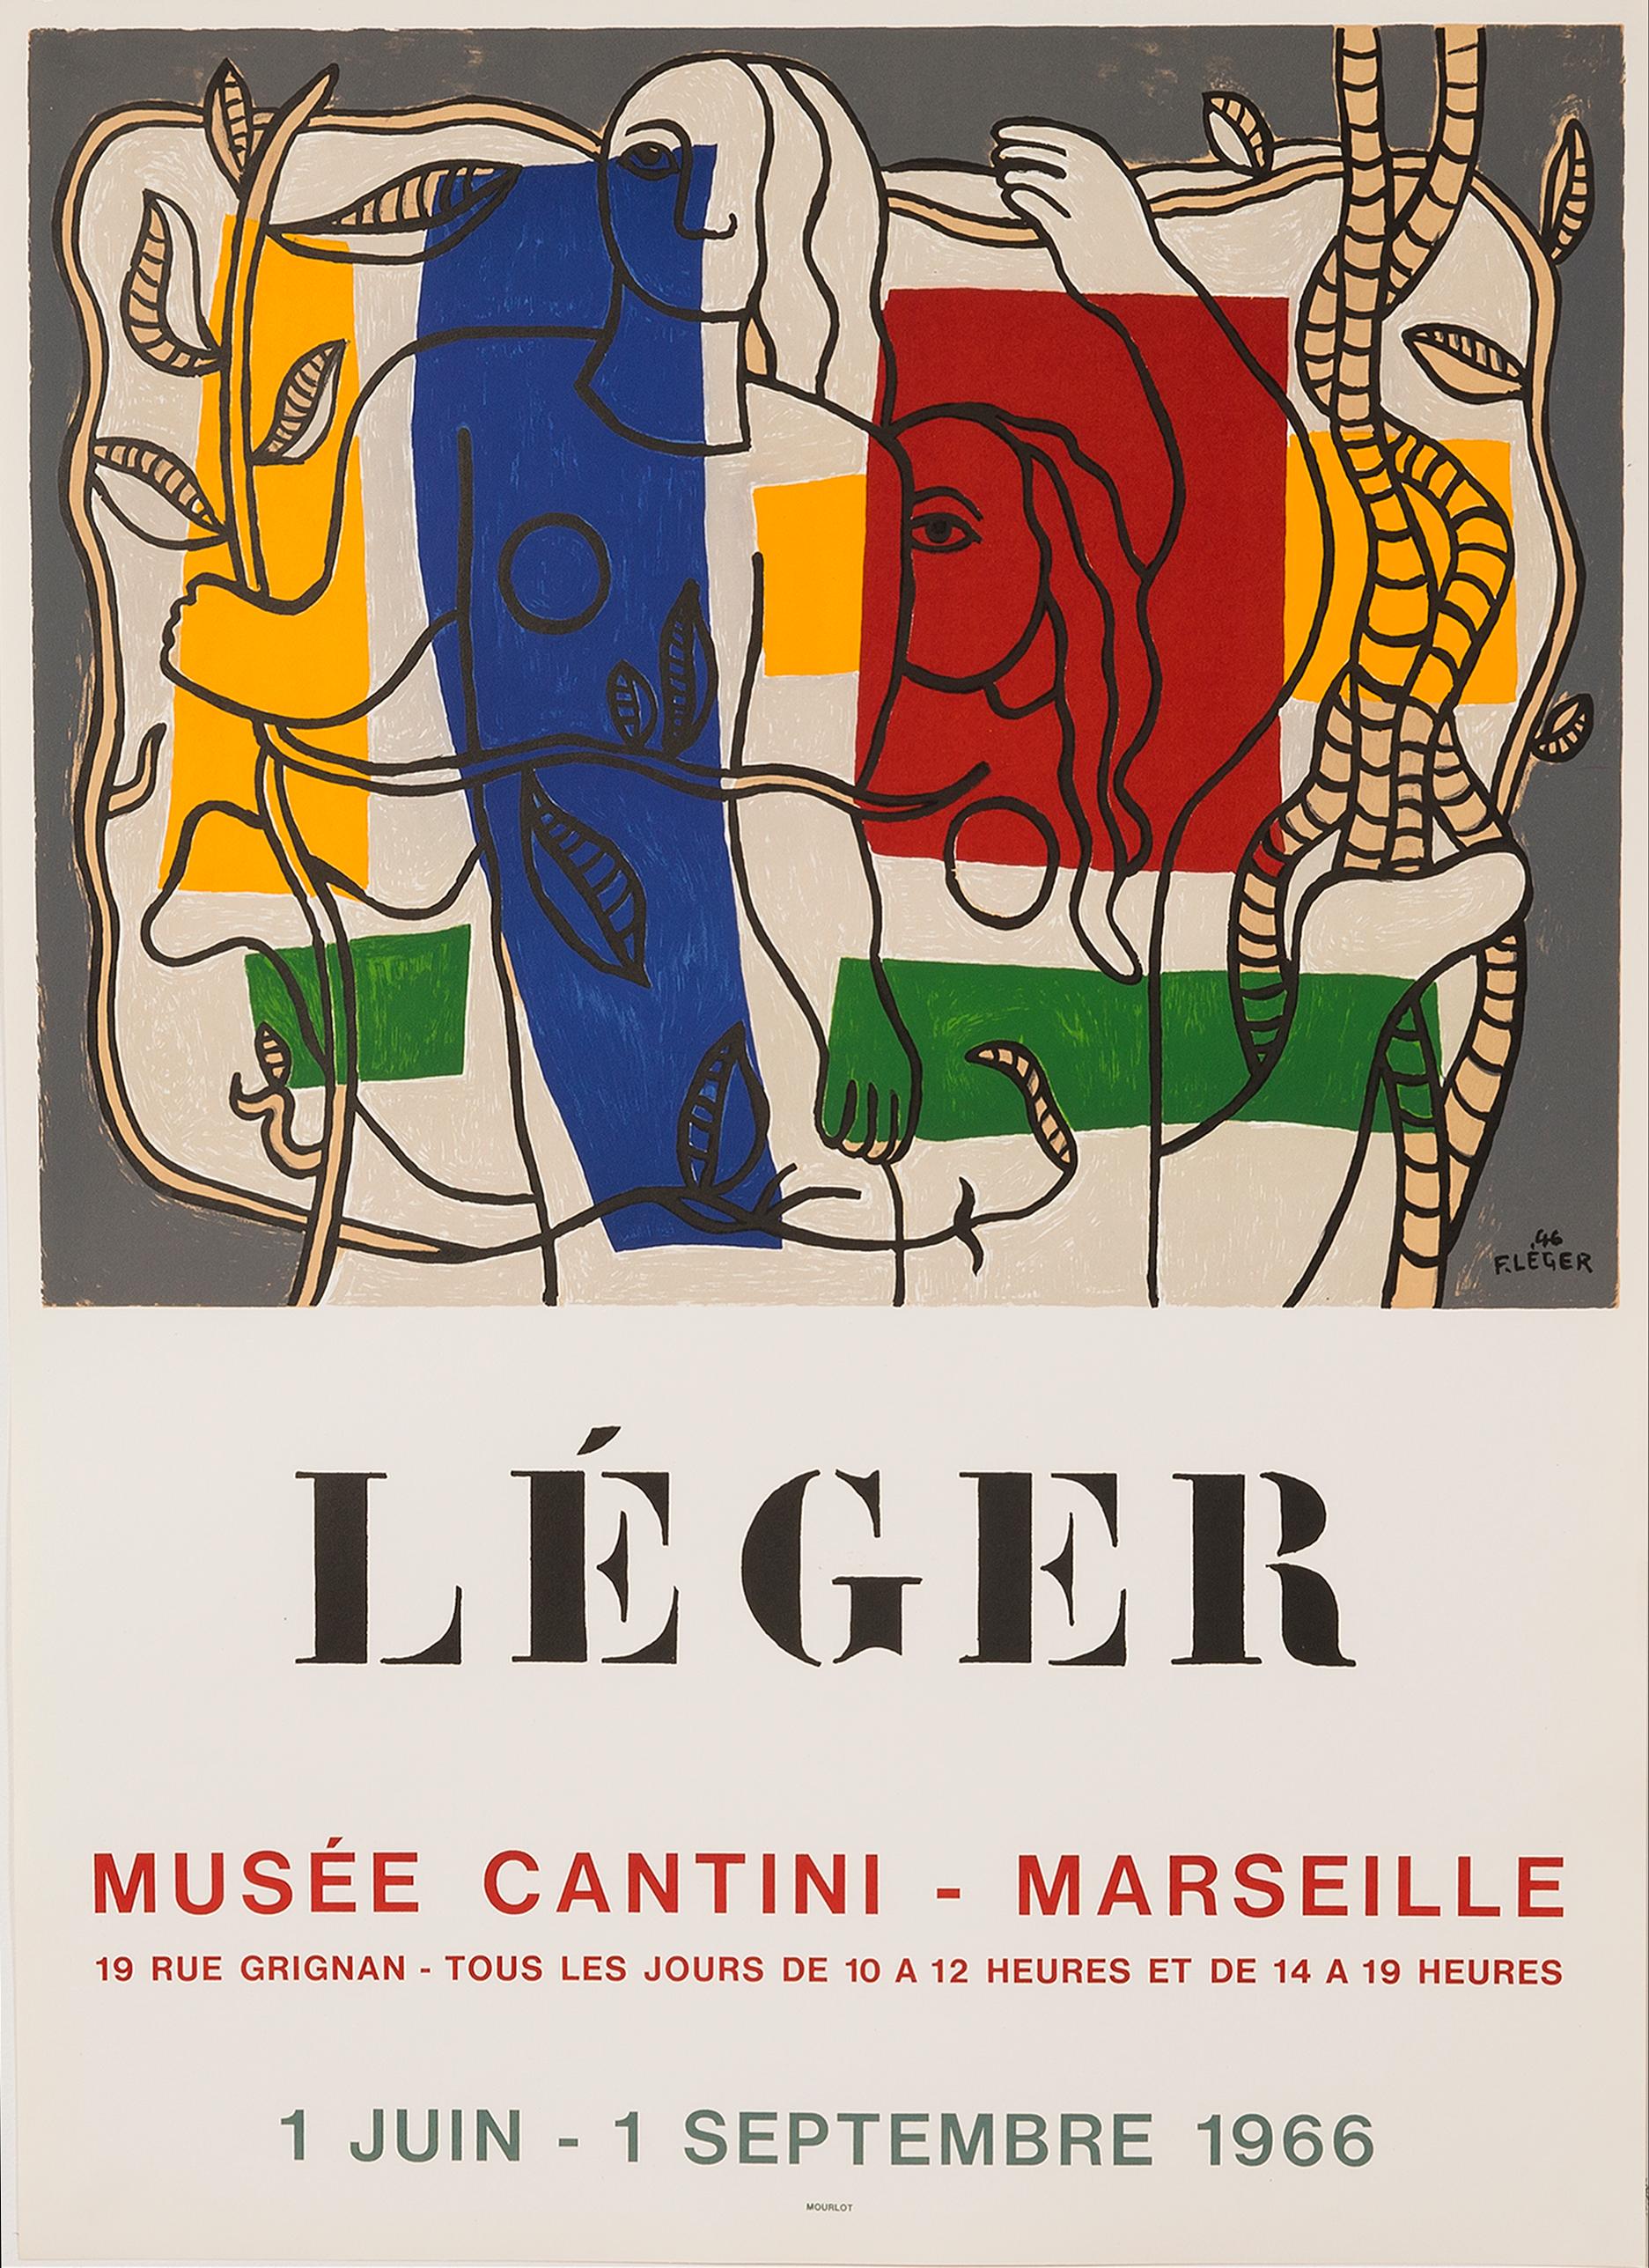 Fernand Léger Print - Musée Cantini lithographic poster by Fernand Leger, 1966